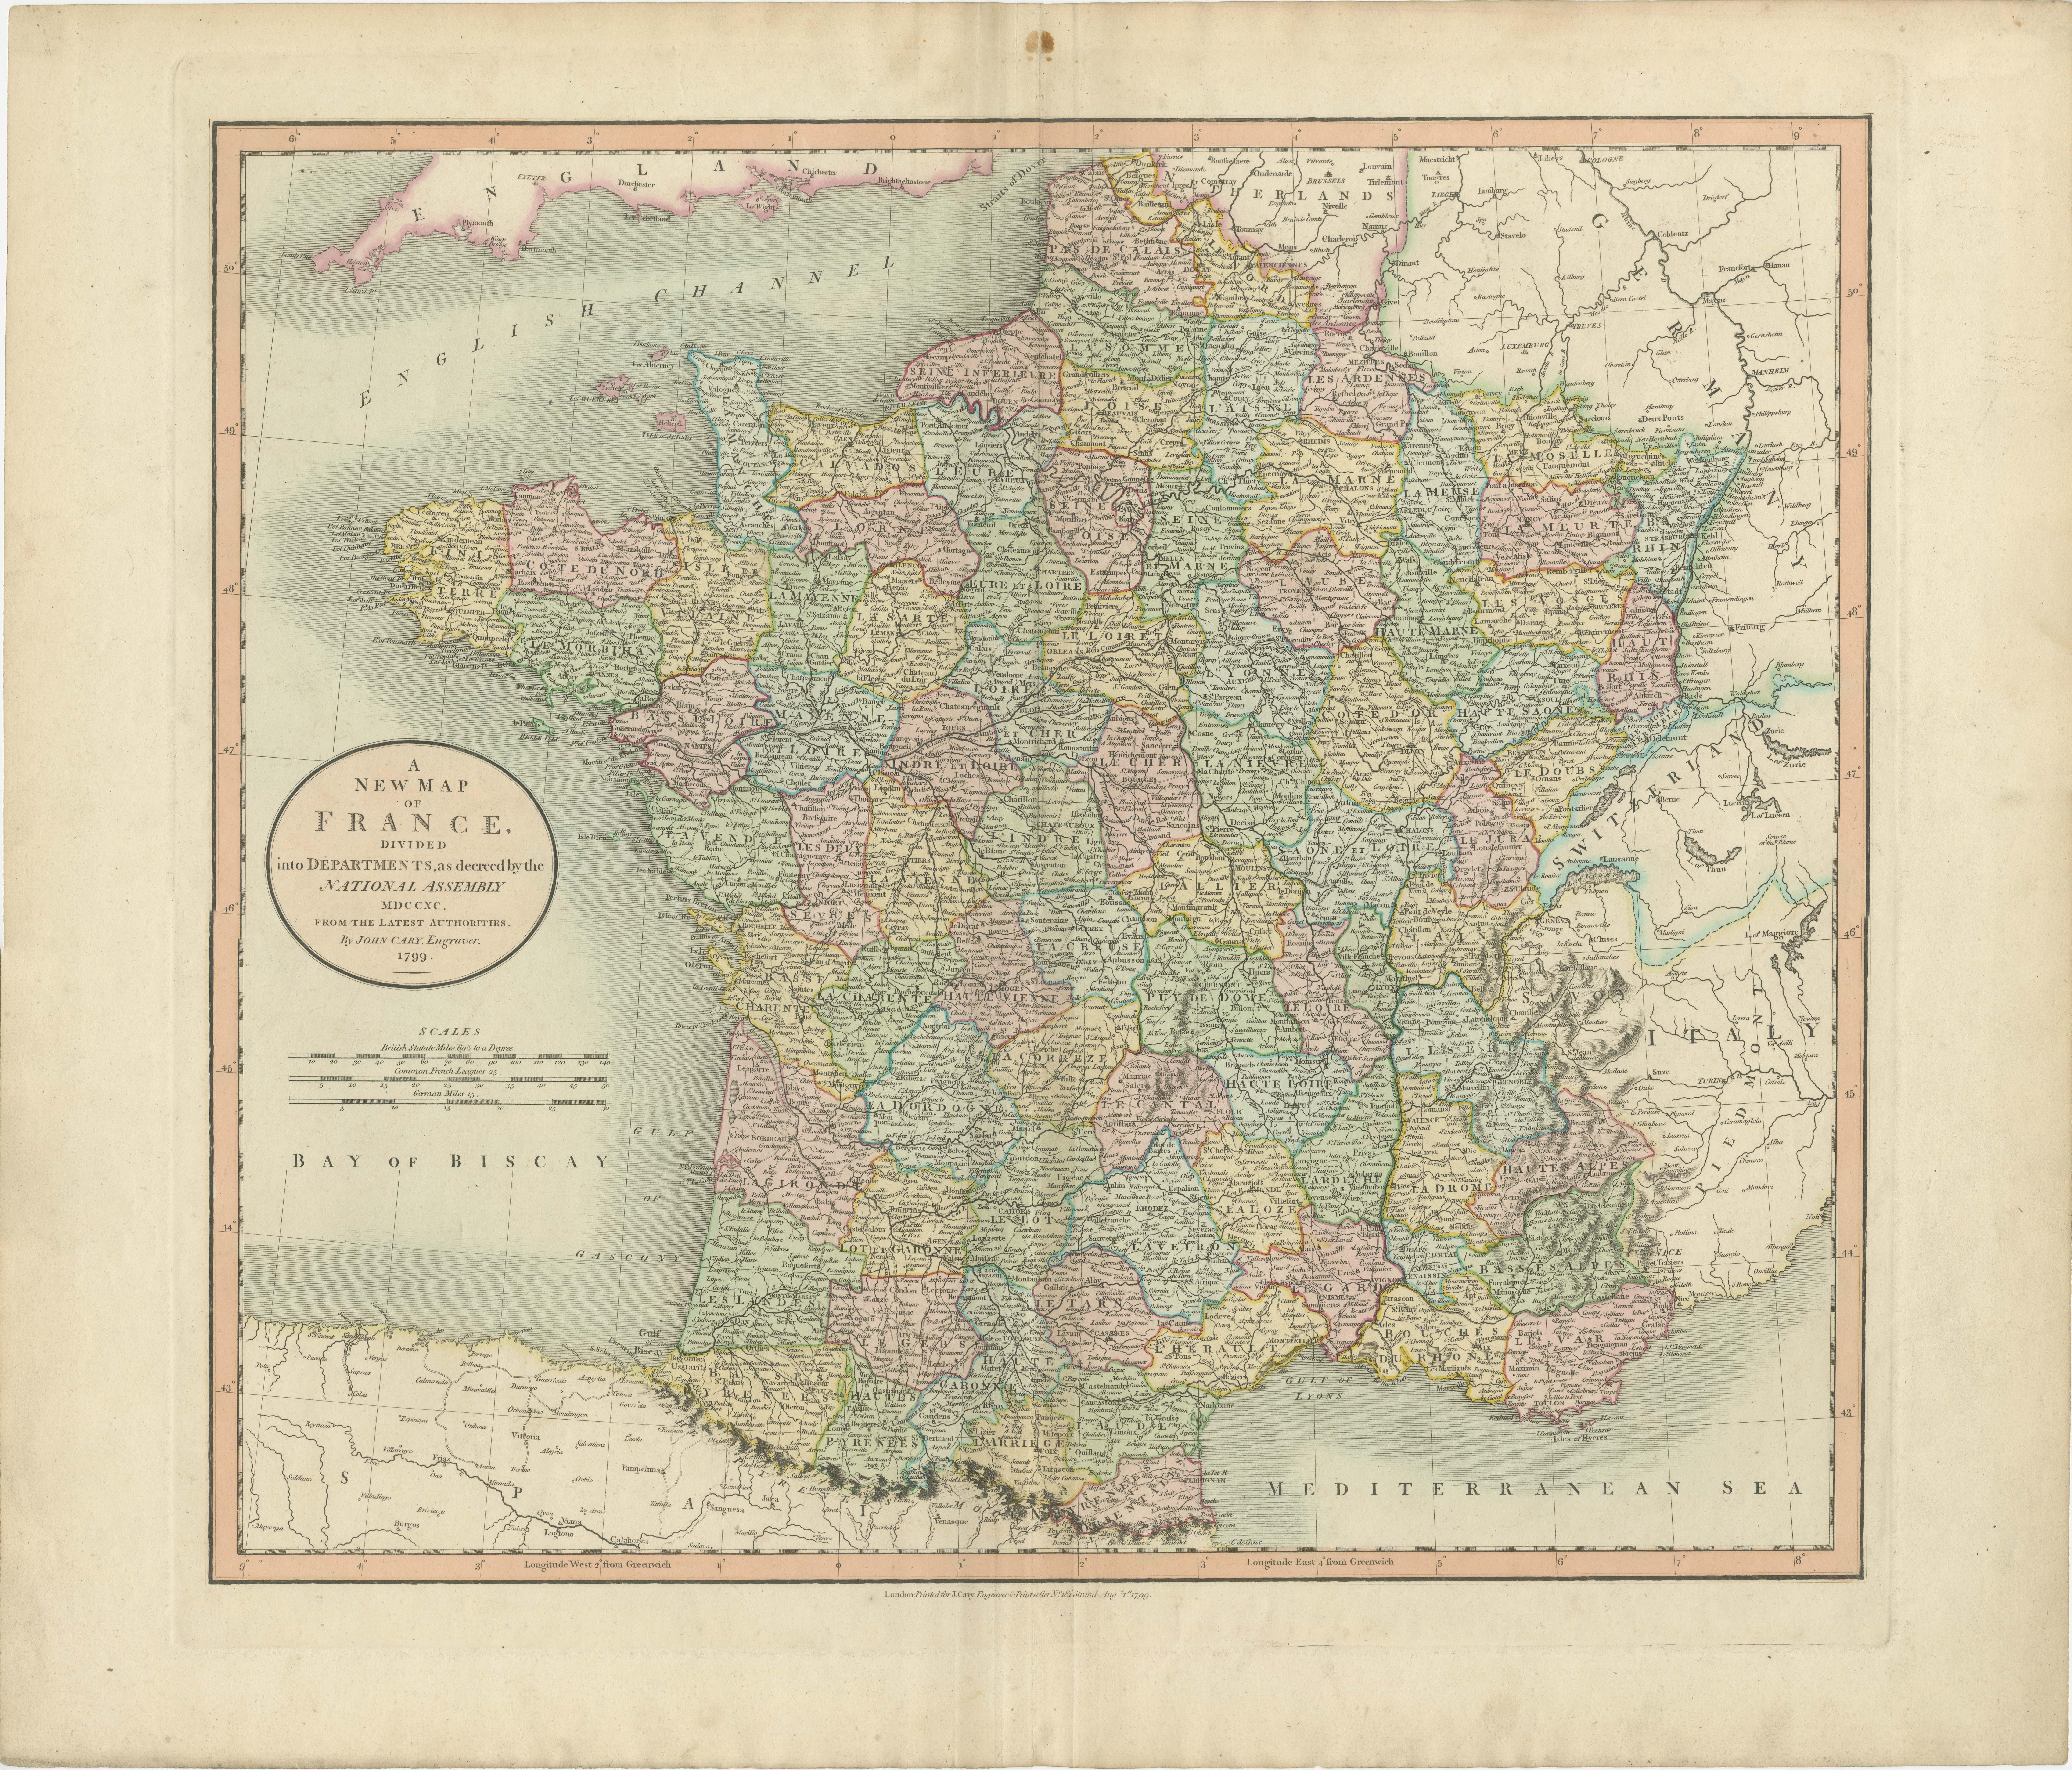 Antique map titled 'A New Map of France (..)'. Original old map of France, divided into departments. With original/contemporary hand coloring. Published by John Cary, 1799. John Cary was an important and prolific London map seller, engraver, globe